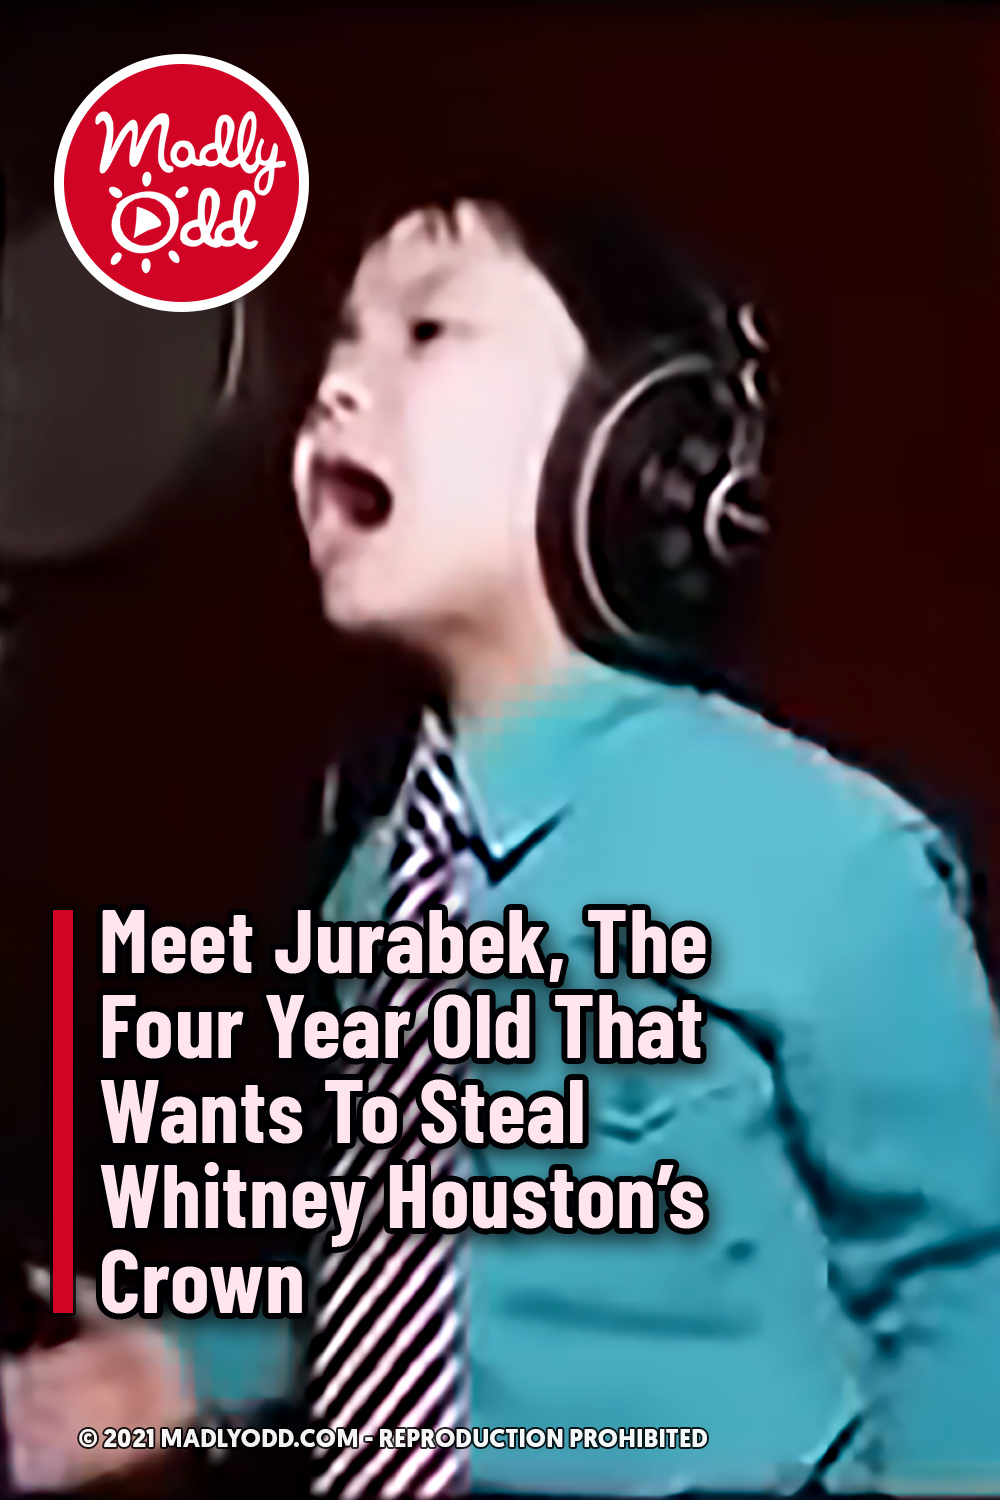 Meet Jurabek, The Four Year Old That Wants To Steal Whitney Houston’s Crown